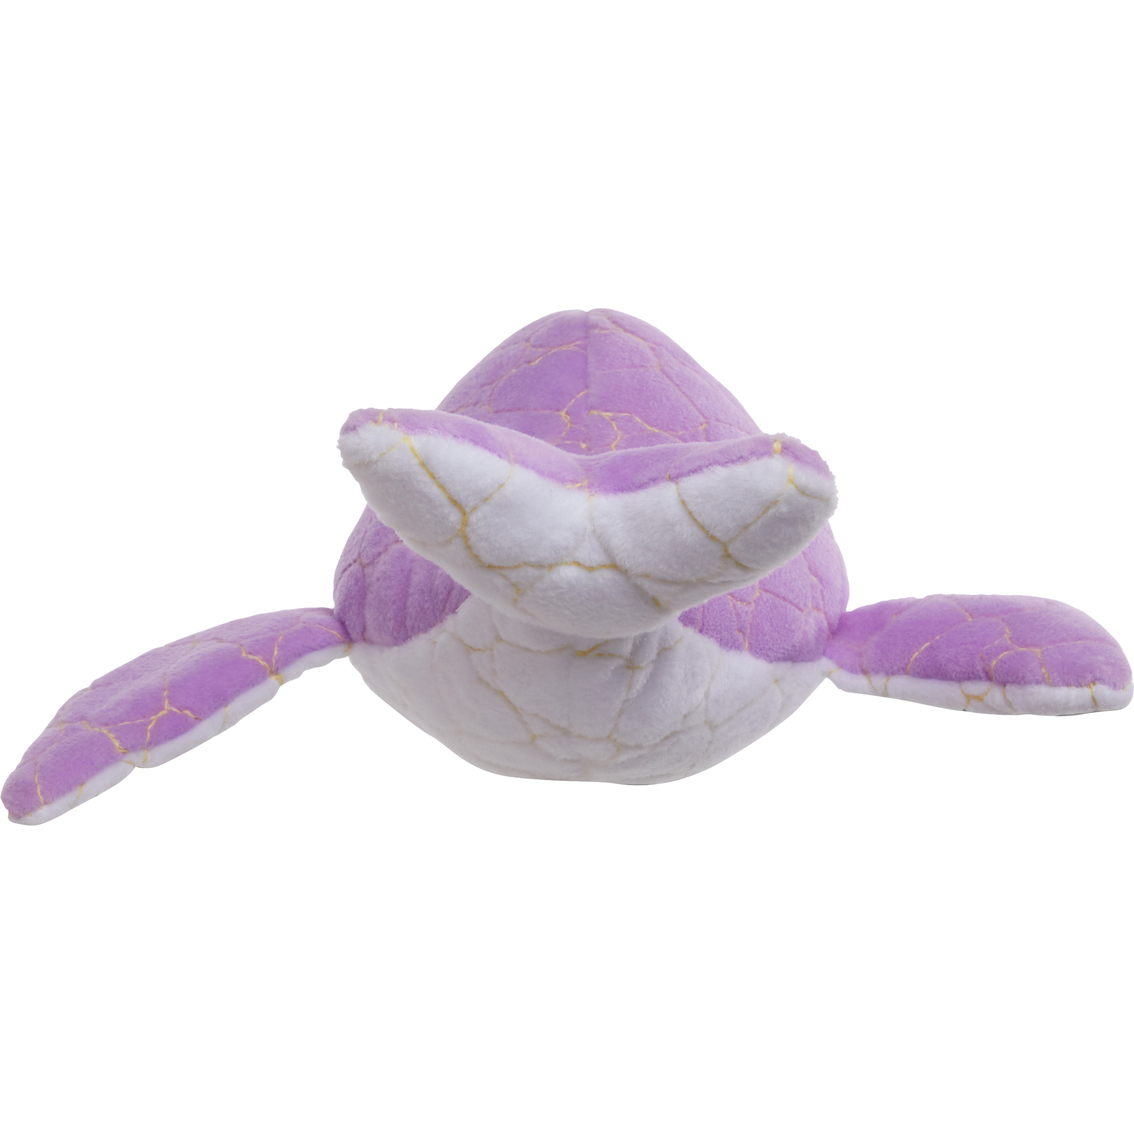 Leaps & Bounds Ruffest & Tuffest Narwhal Tough Plush Toy, Medium - Image 3 of 3